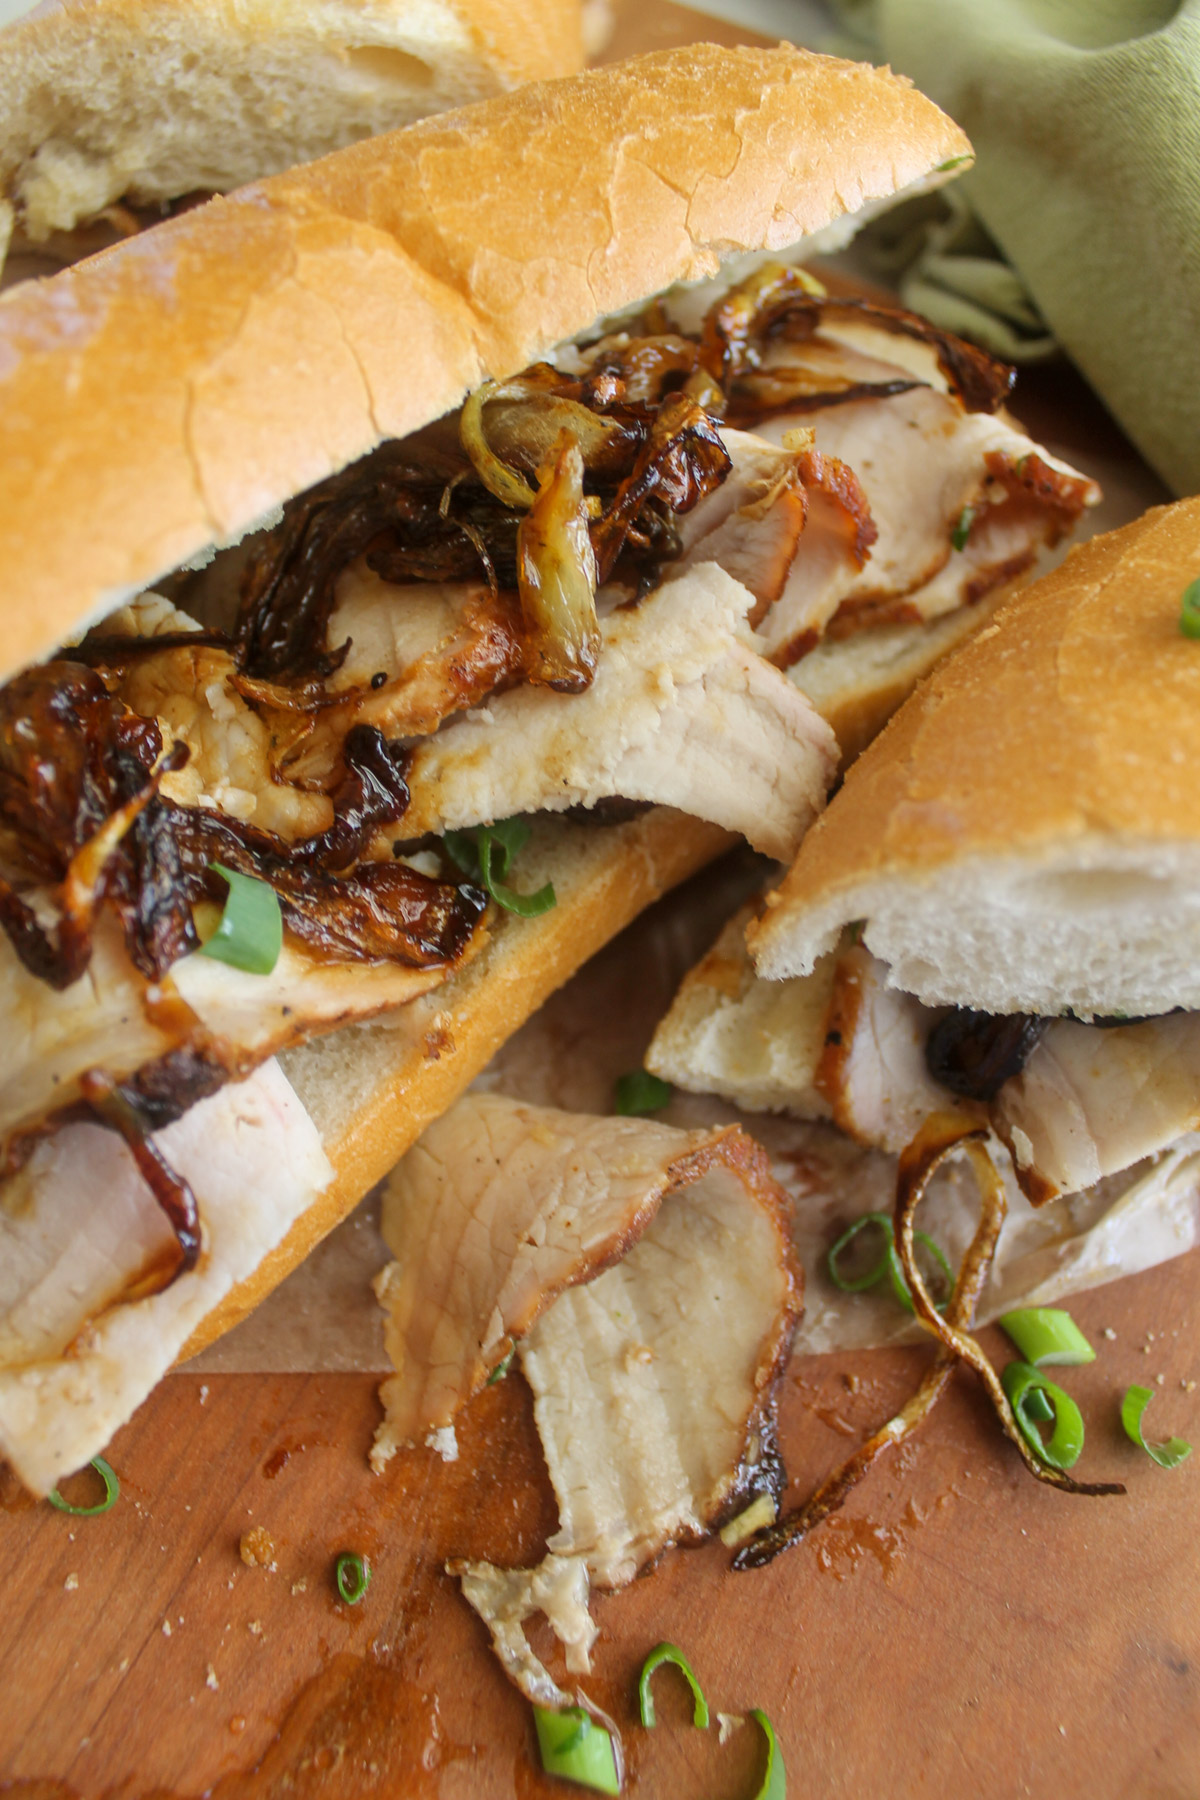 Hoagie buns piled with shaved pork roast and onions sandwiches.